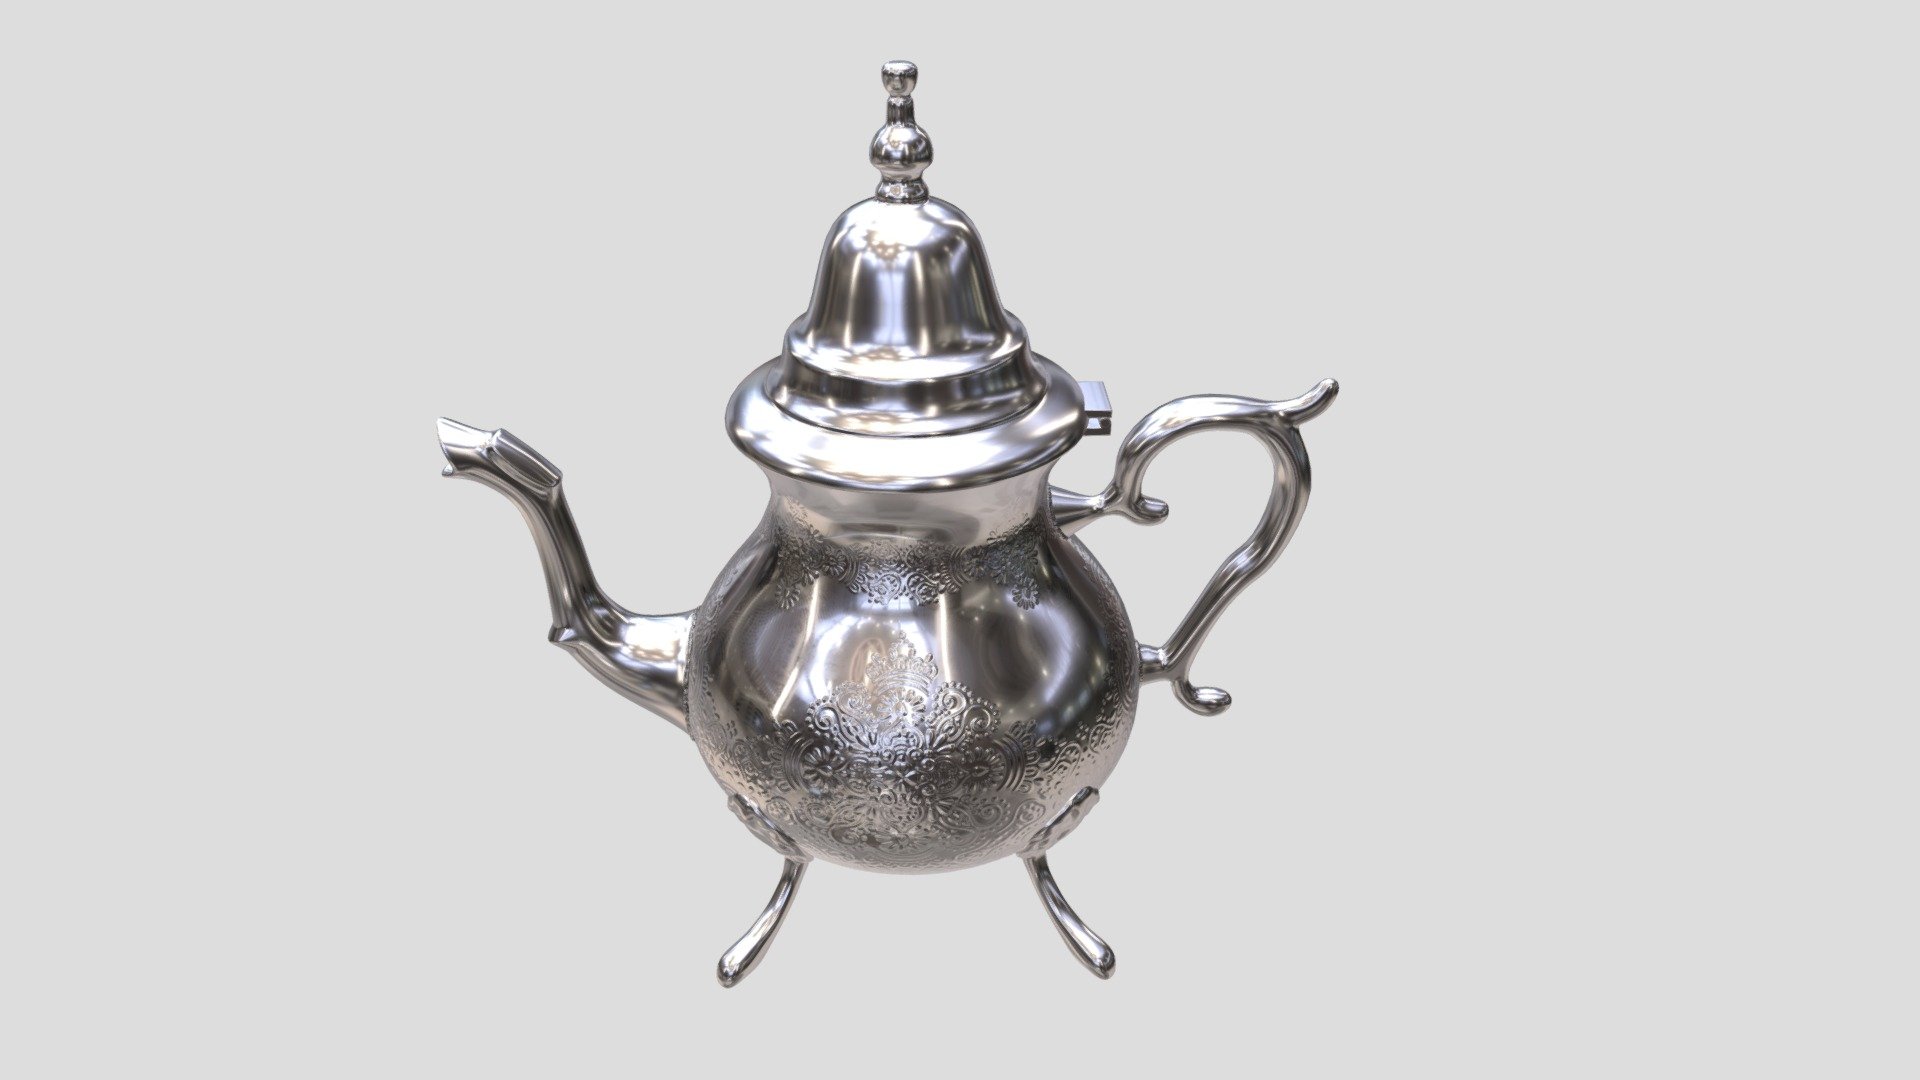 A very nice teapot (Barrad) model inspired from the Moroccan culture in high poly with clean and quad topology 3d model